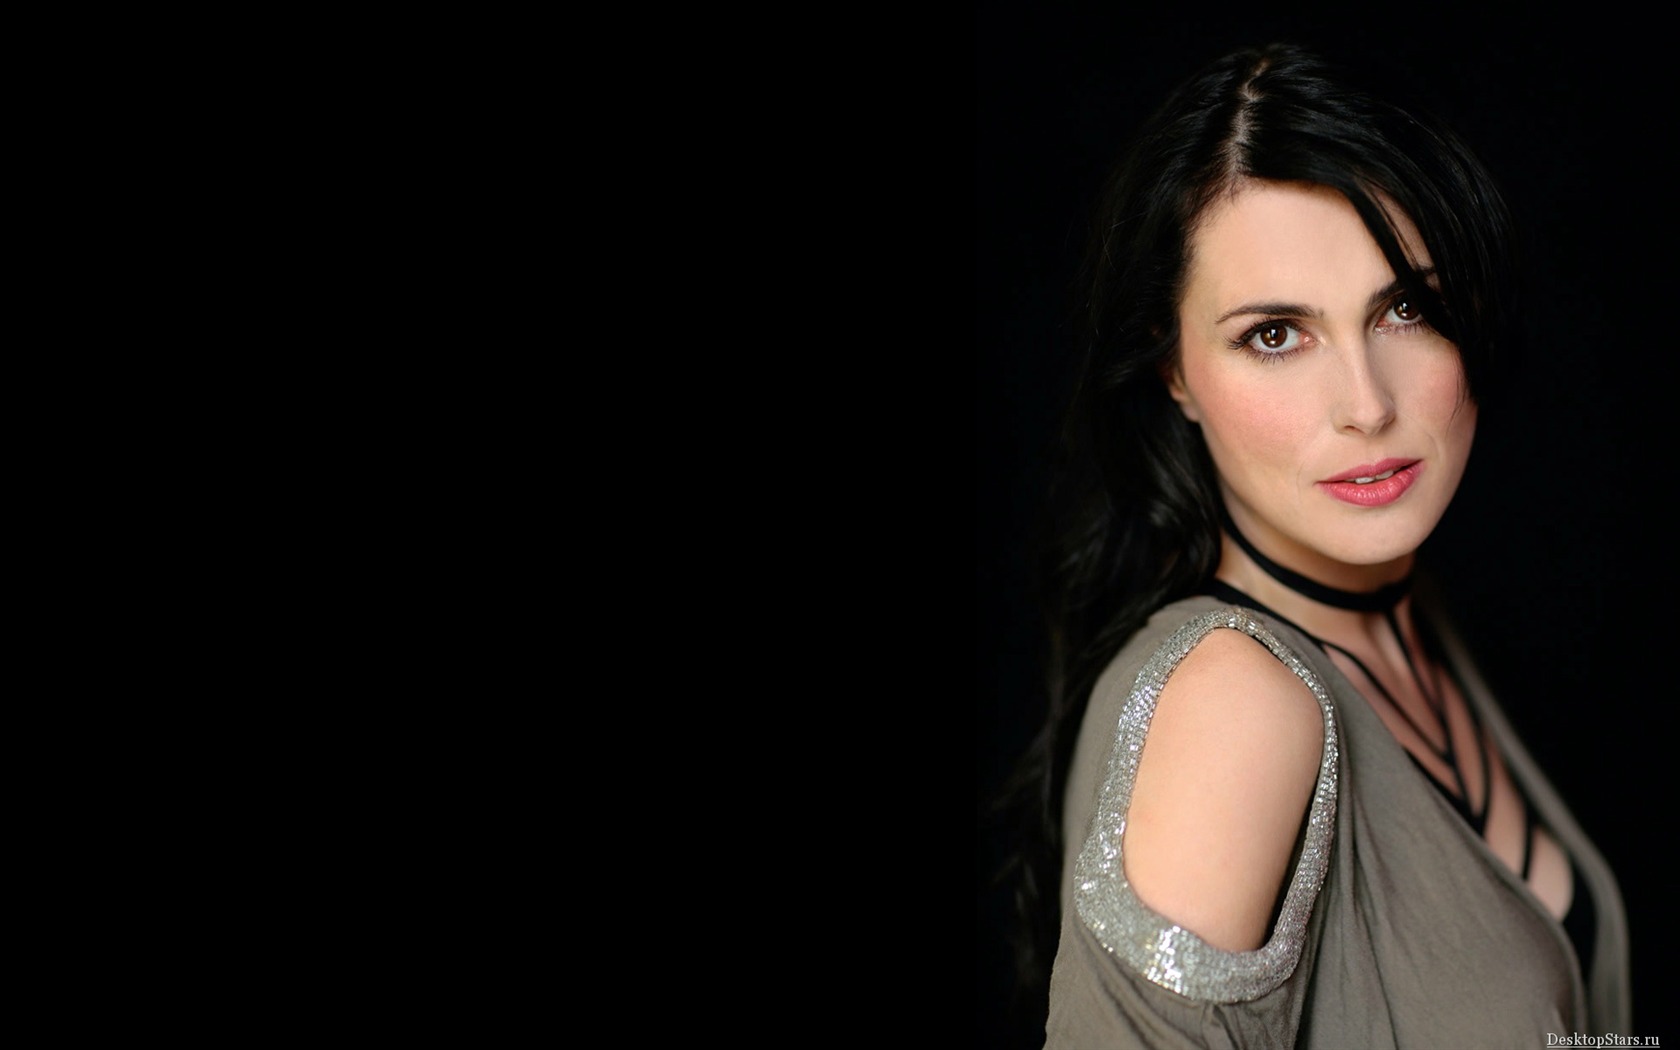 Sharon den Adel #004 - 1680x1050 Wallpapers Pictures Photos Images